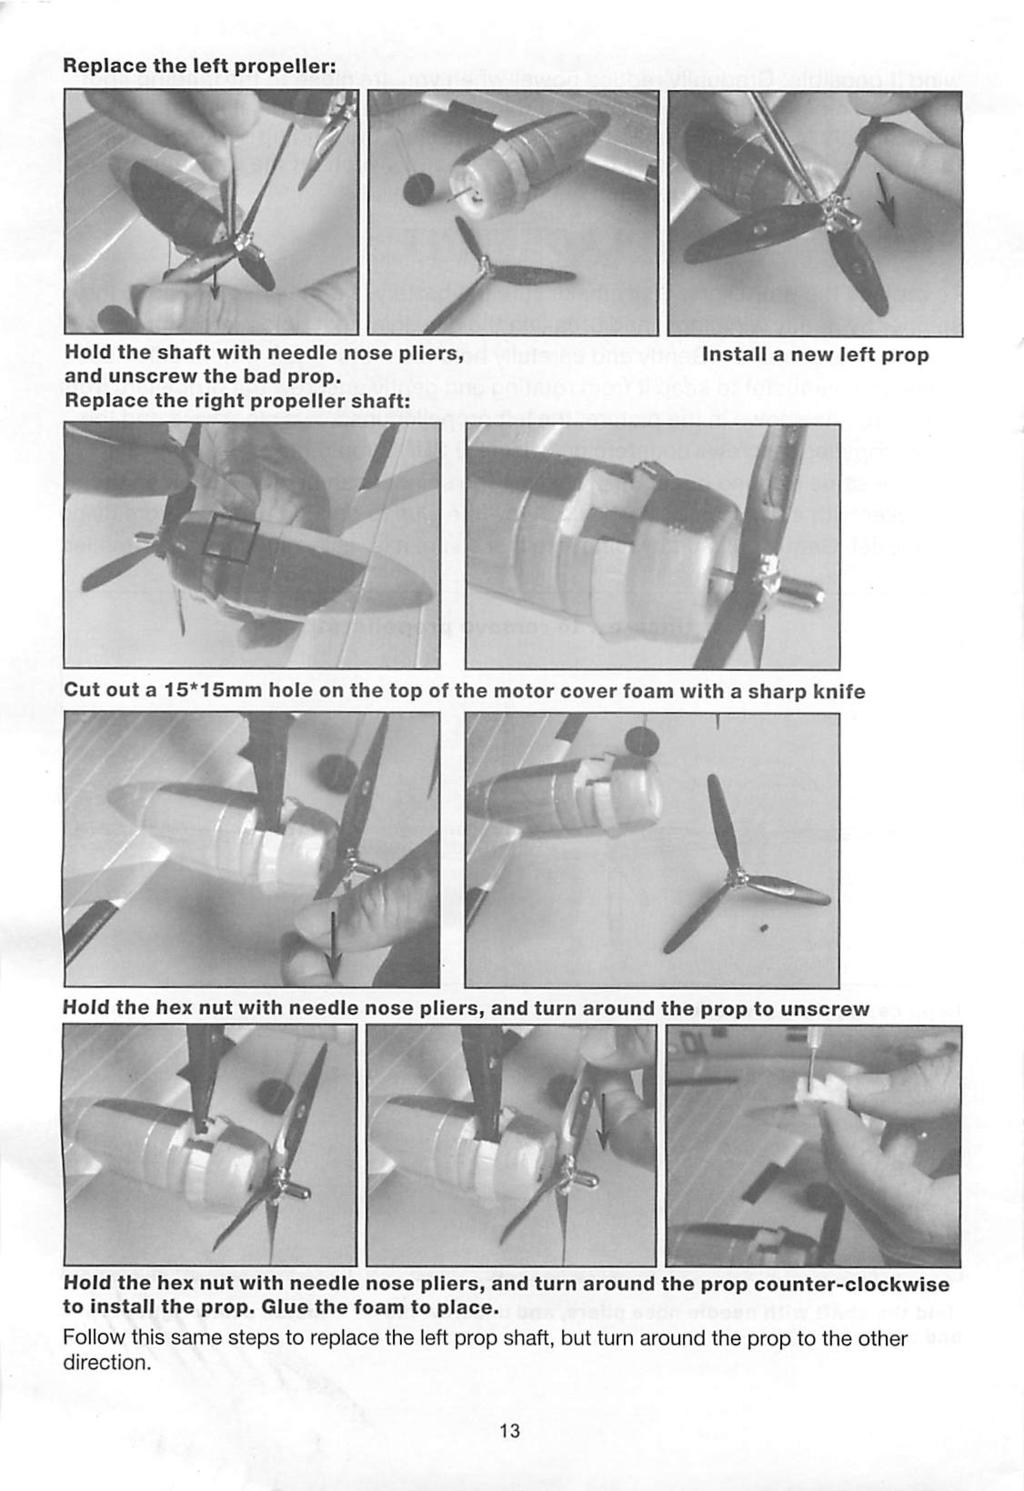 Replace the left propeller: as Hold the shaft with needle nose pliers, and unscrew the bad prop.